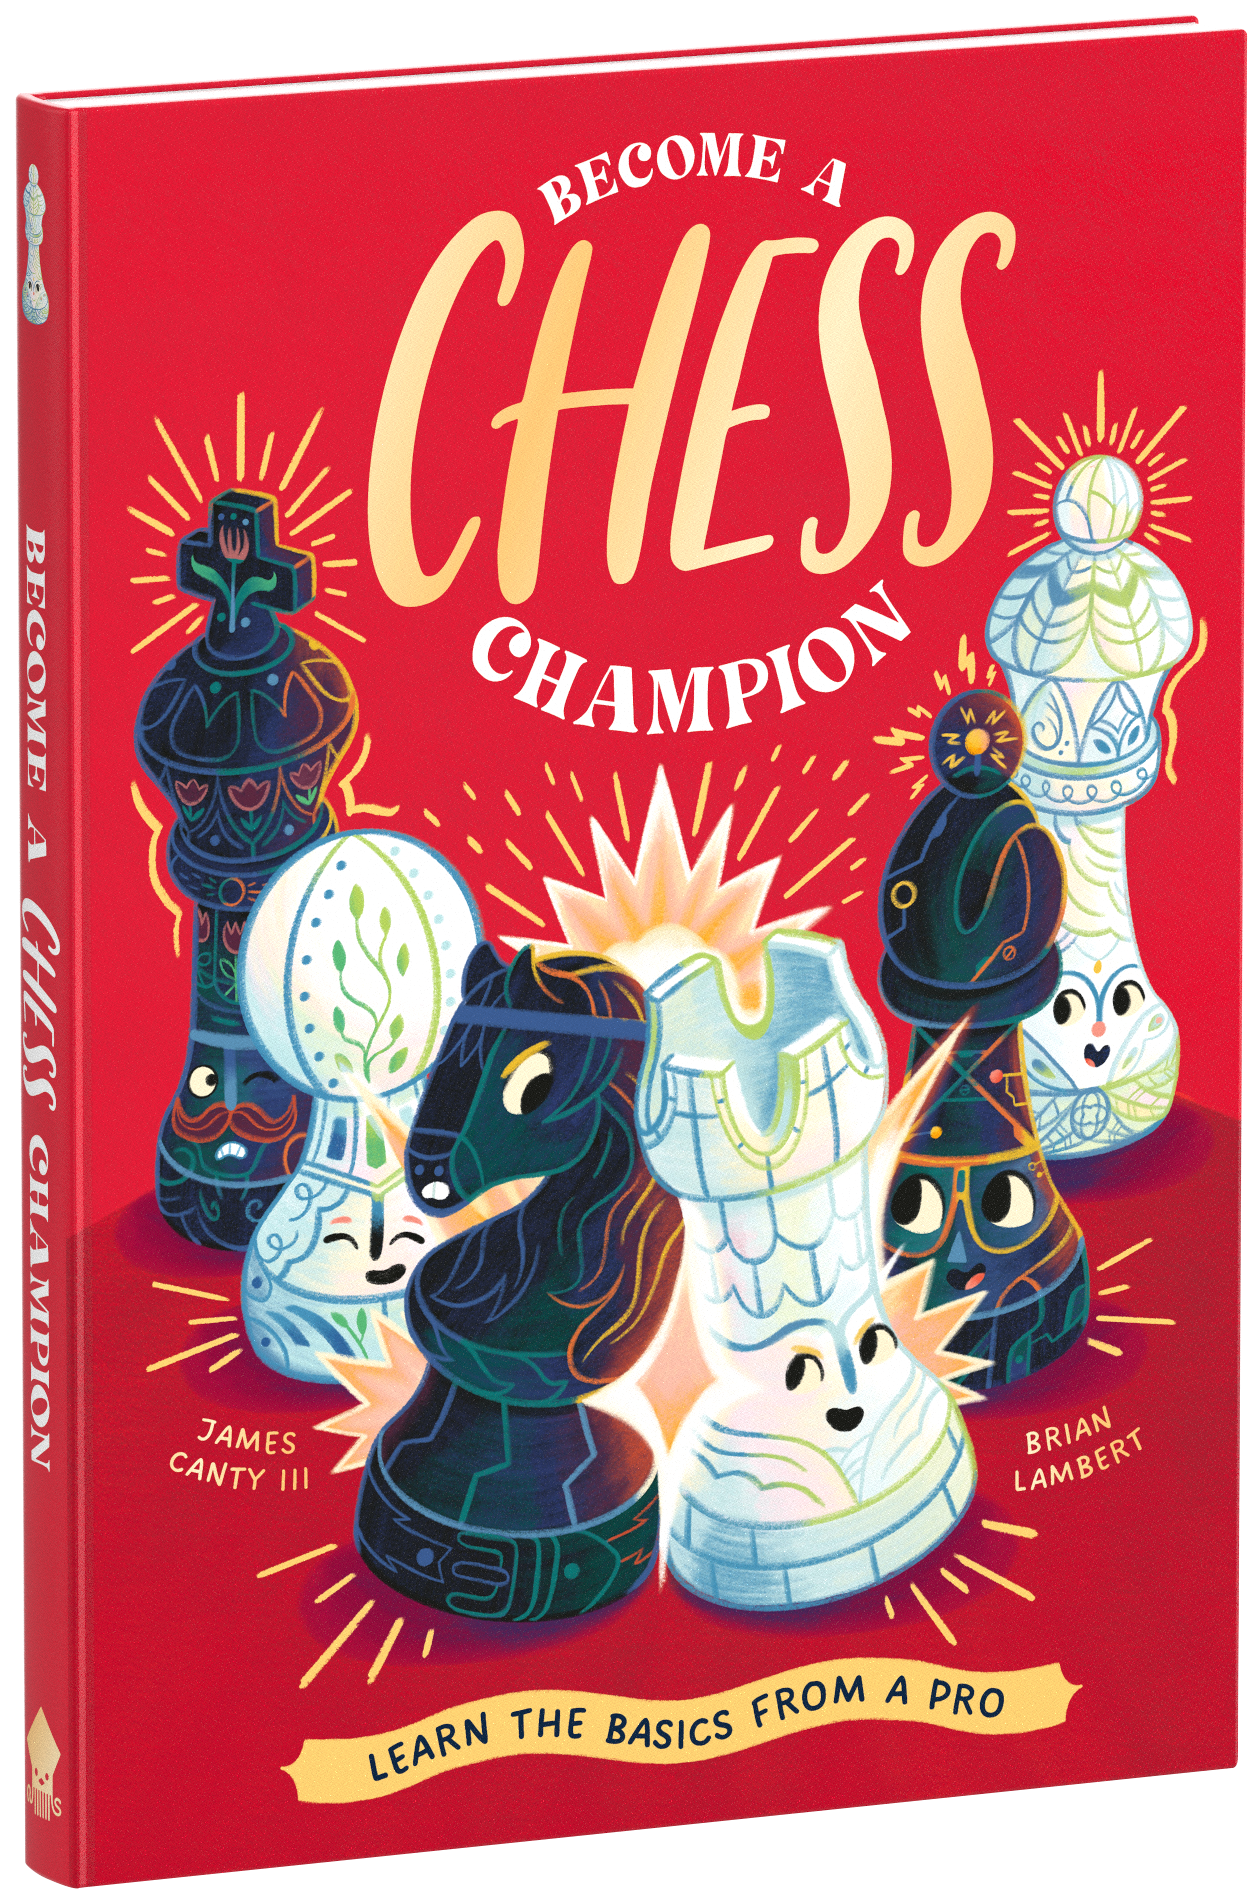 A vibrant red book cover titled "become a chess champion" featuring colorful, stylized chess pieces including a king, queen, and knight, with rays of light emanating from the central pawn.